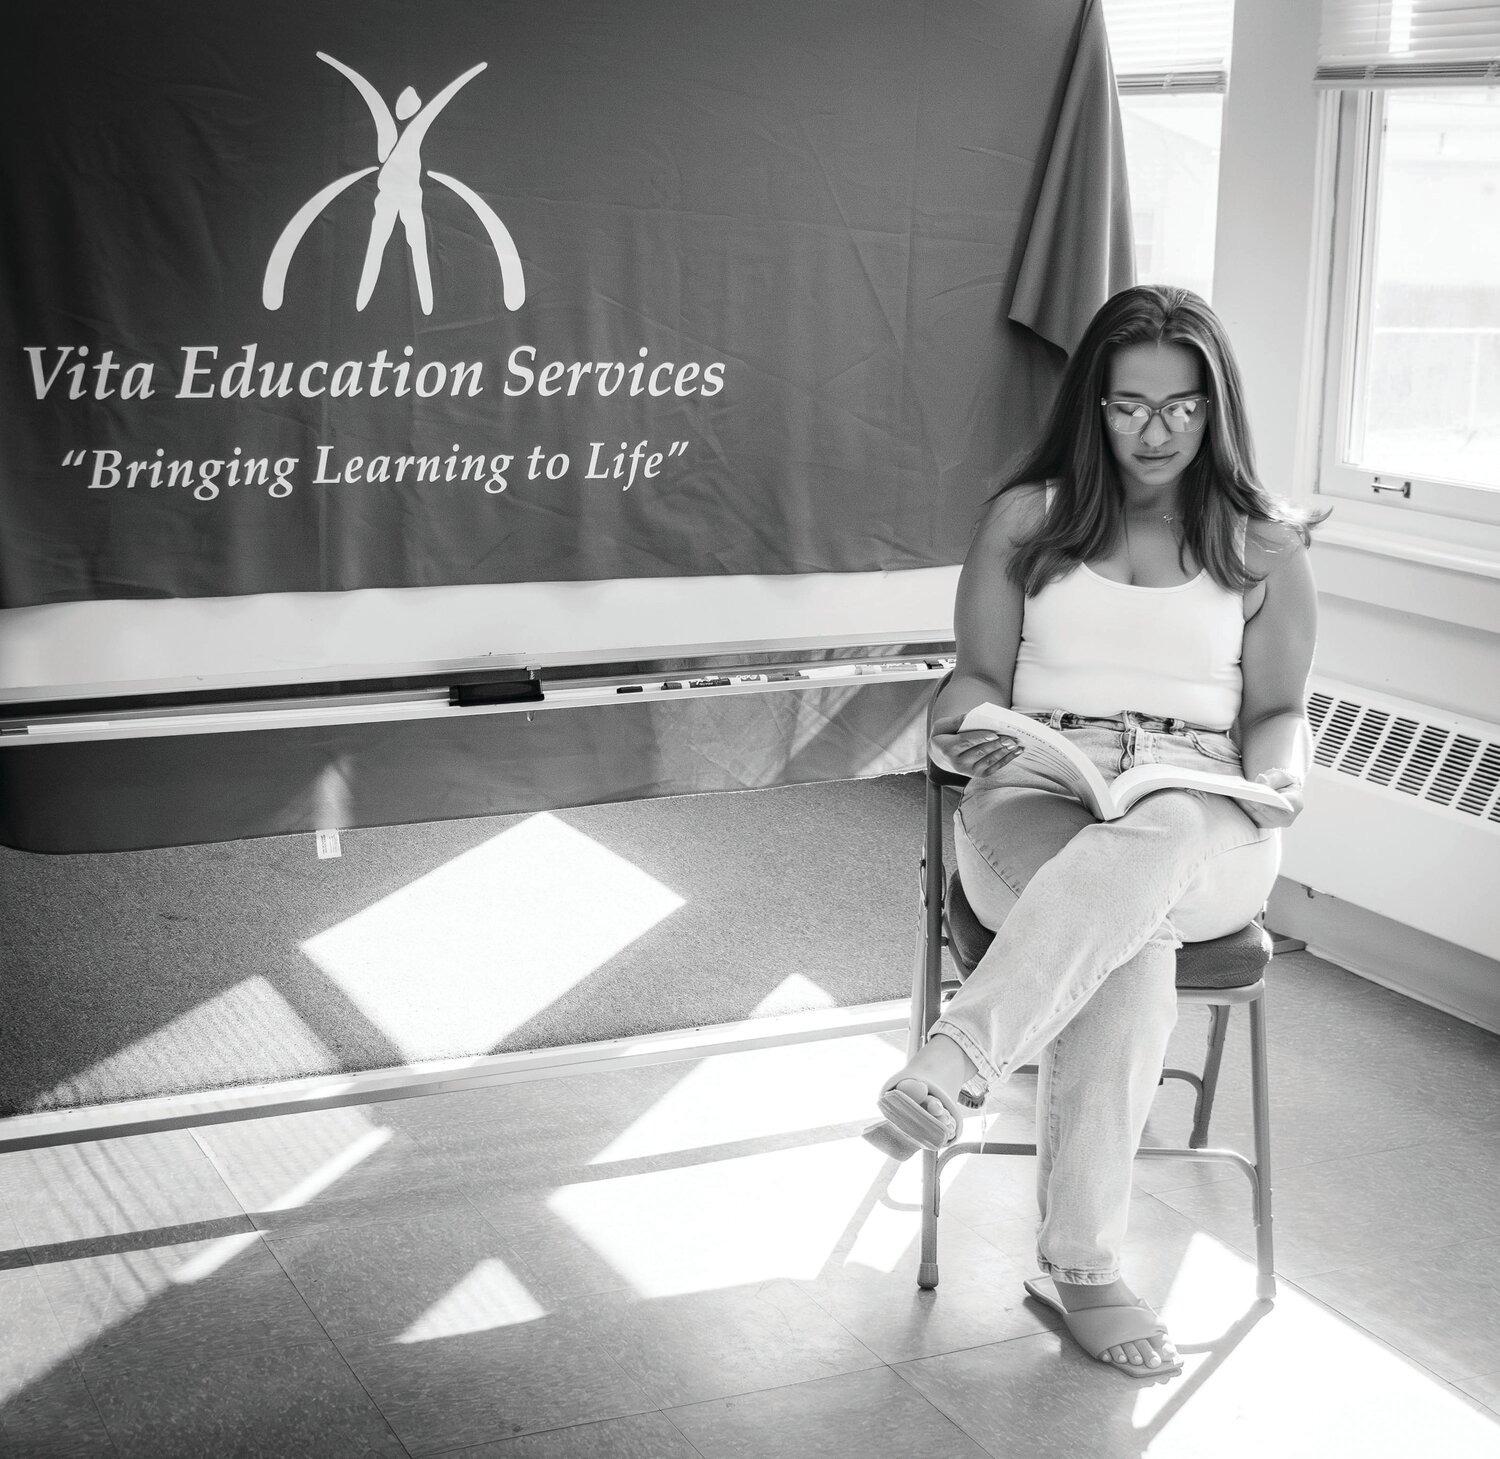 Kasandra Yanes, 24, of Croydon, earned her GED at Vita during the pandemic by taking virtual courses the nonprofit offered.